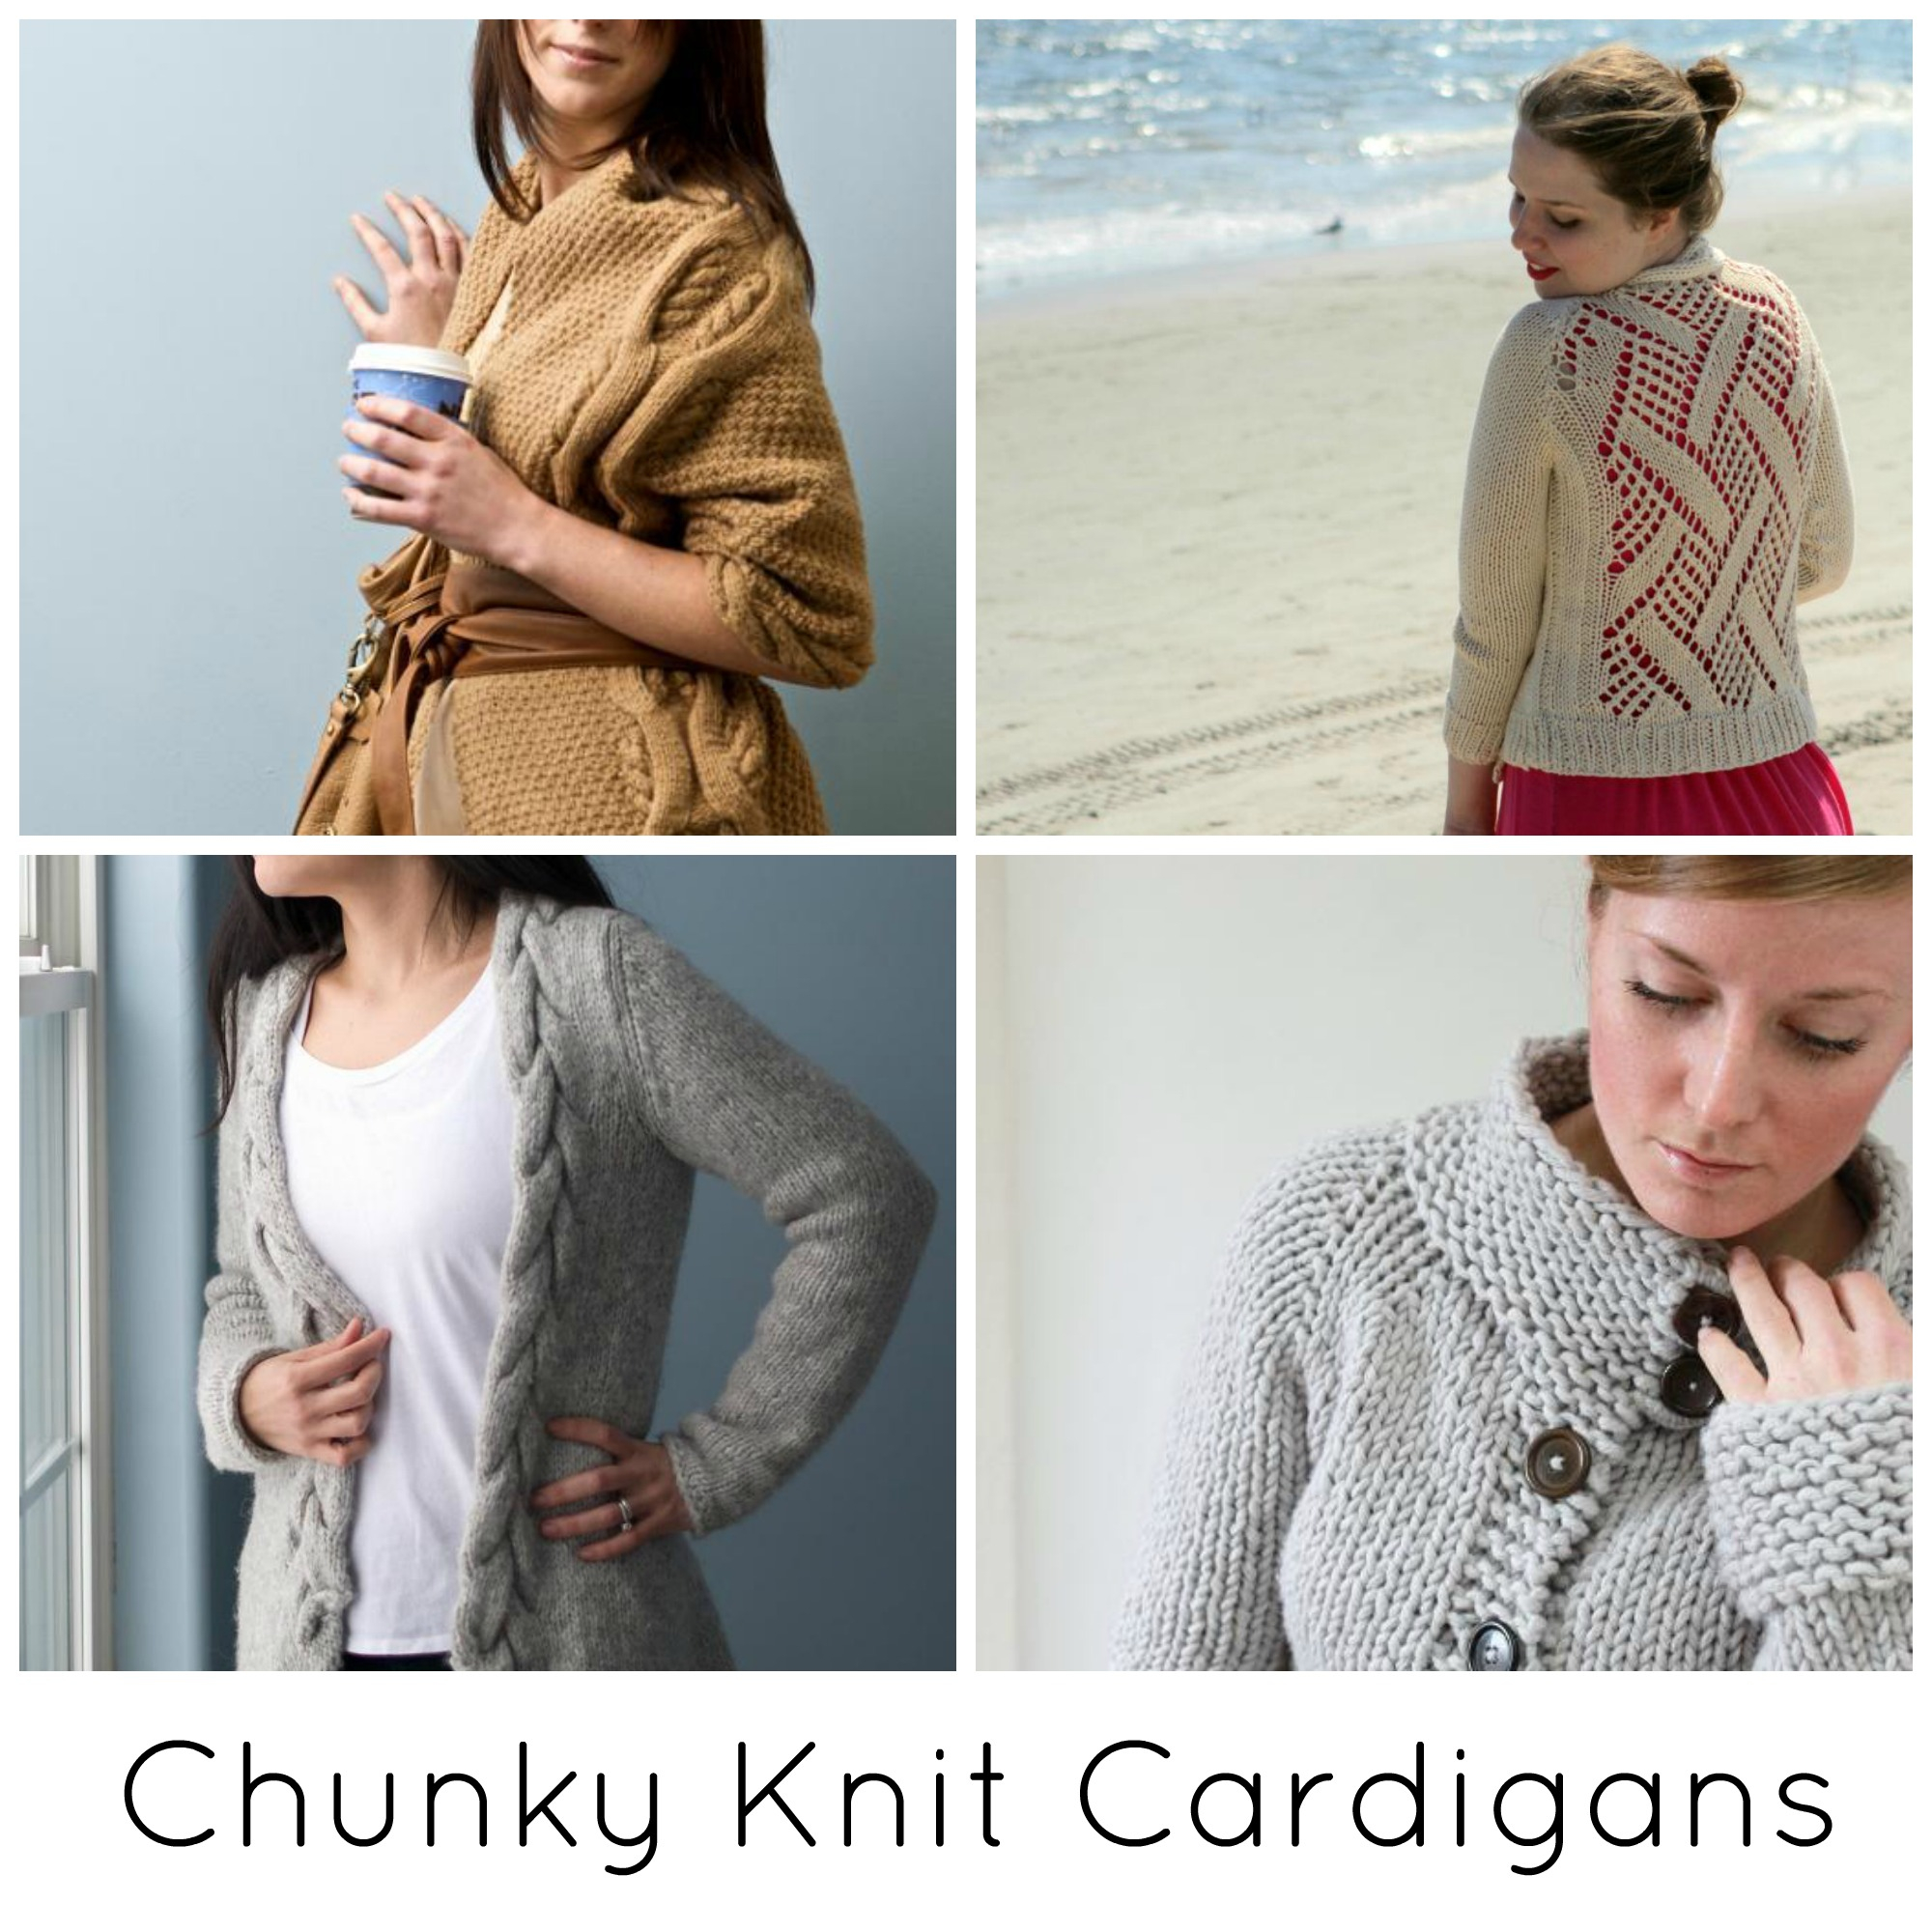 Free Cardigan Knitting Patterns For Beginners The Coziest Chunky Knit Cardigan Patterns Ever